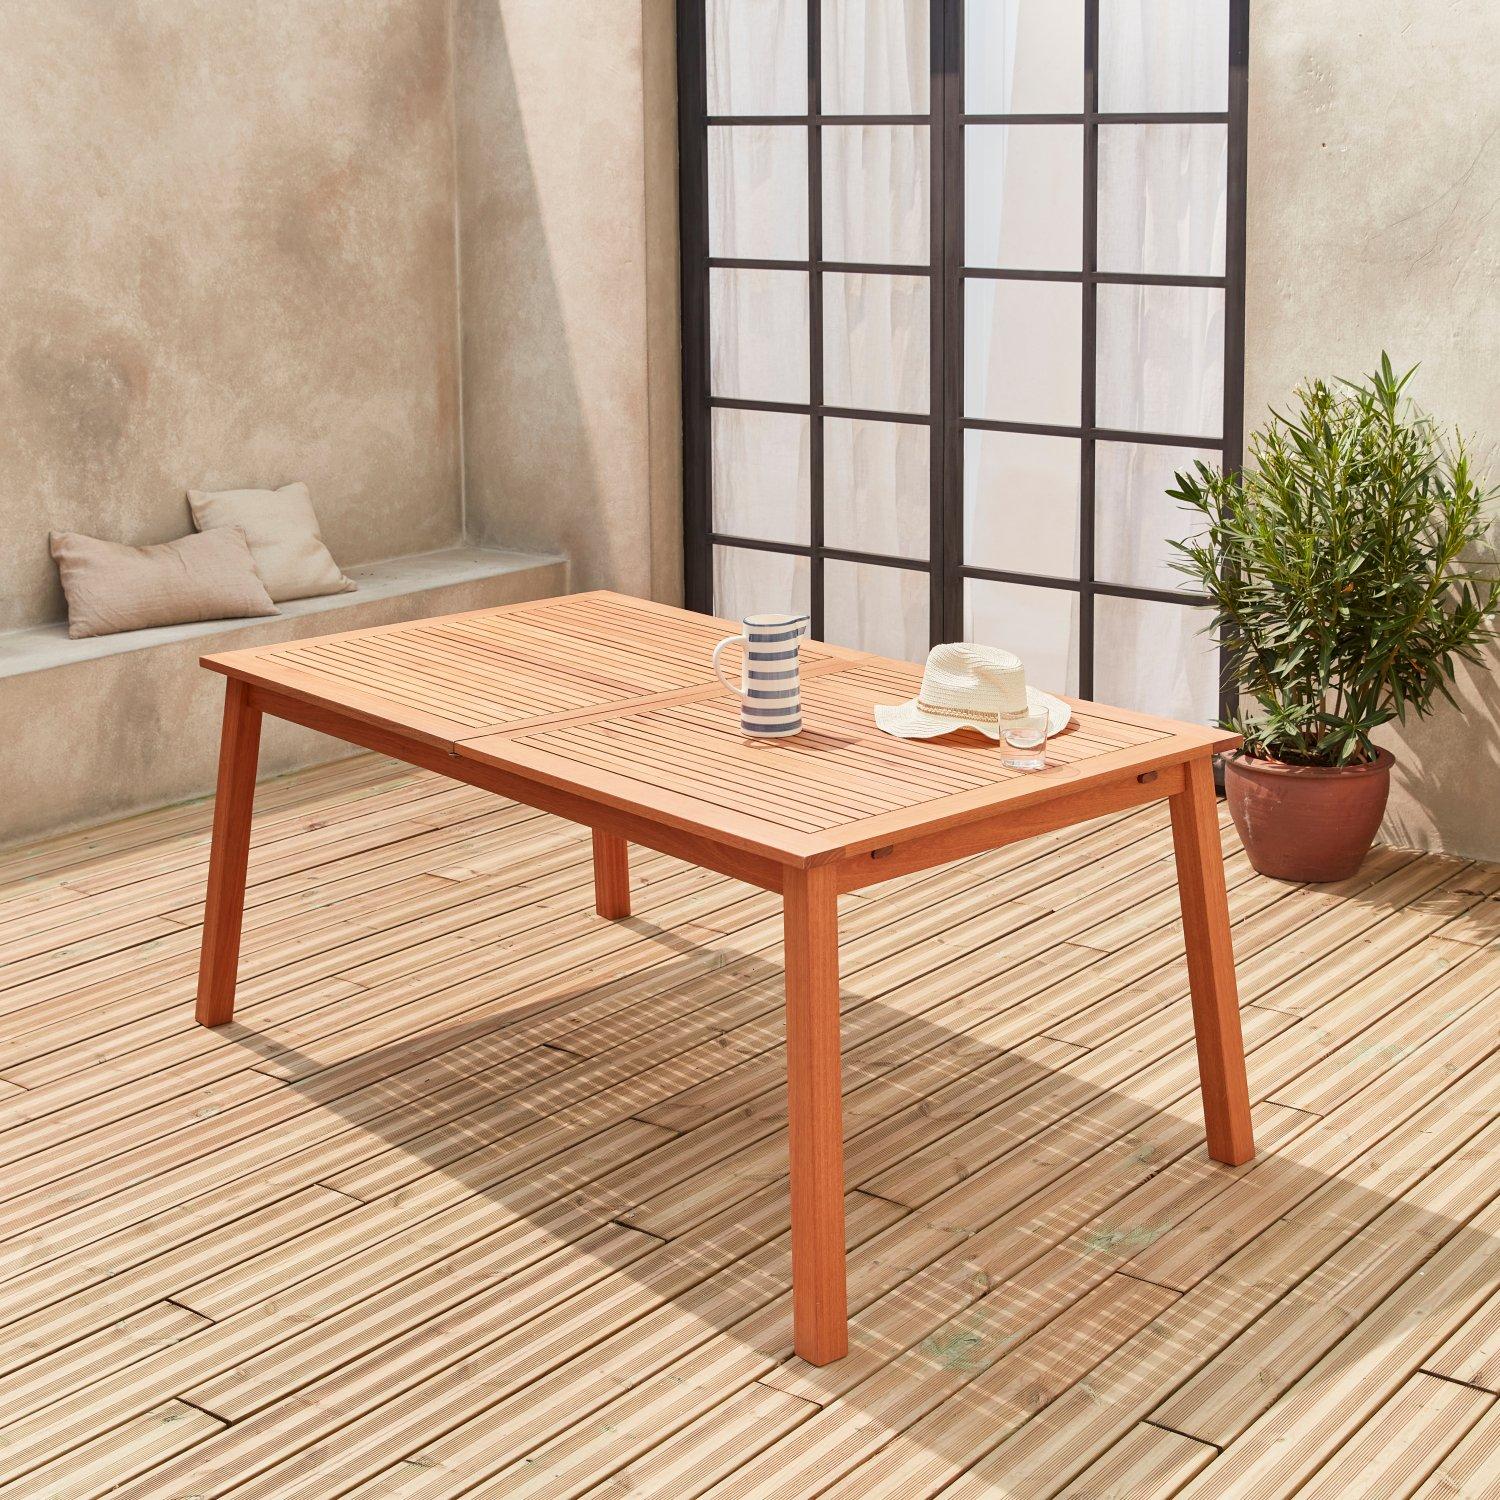 8 To 10-seater Extendable Wooden Garden Table